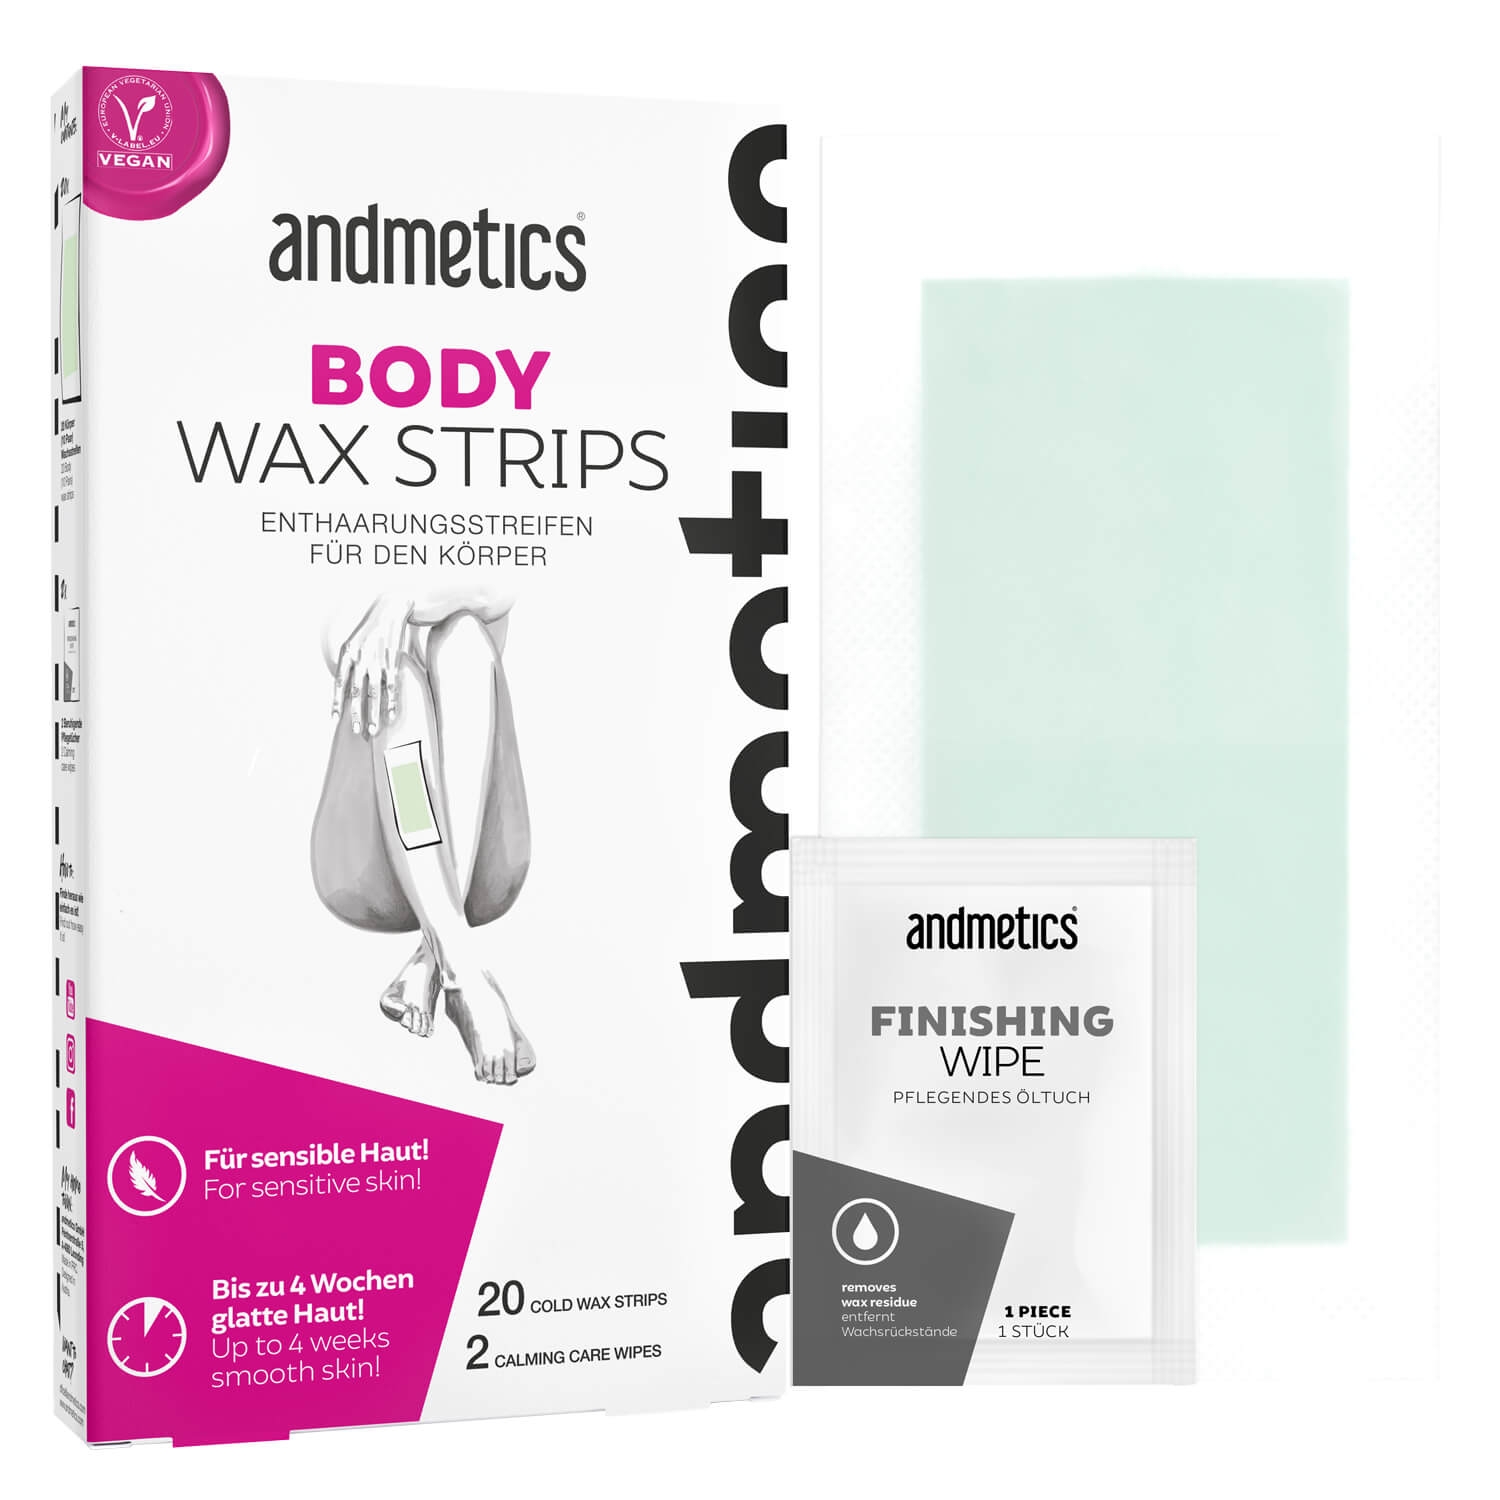 Product image from andmetics - Body Wax Strips